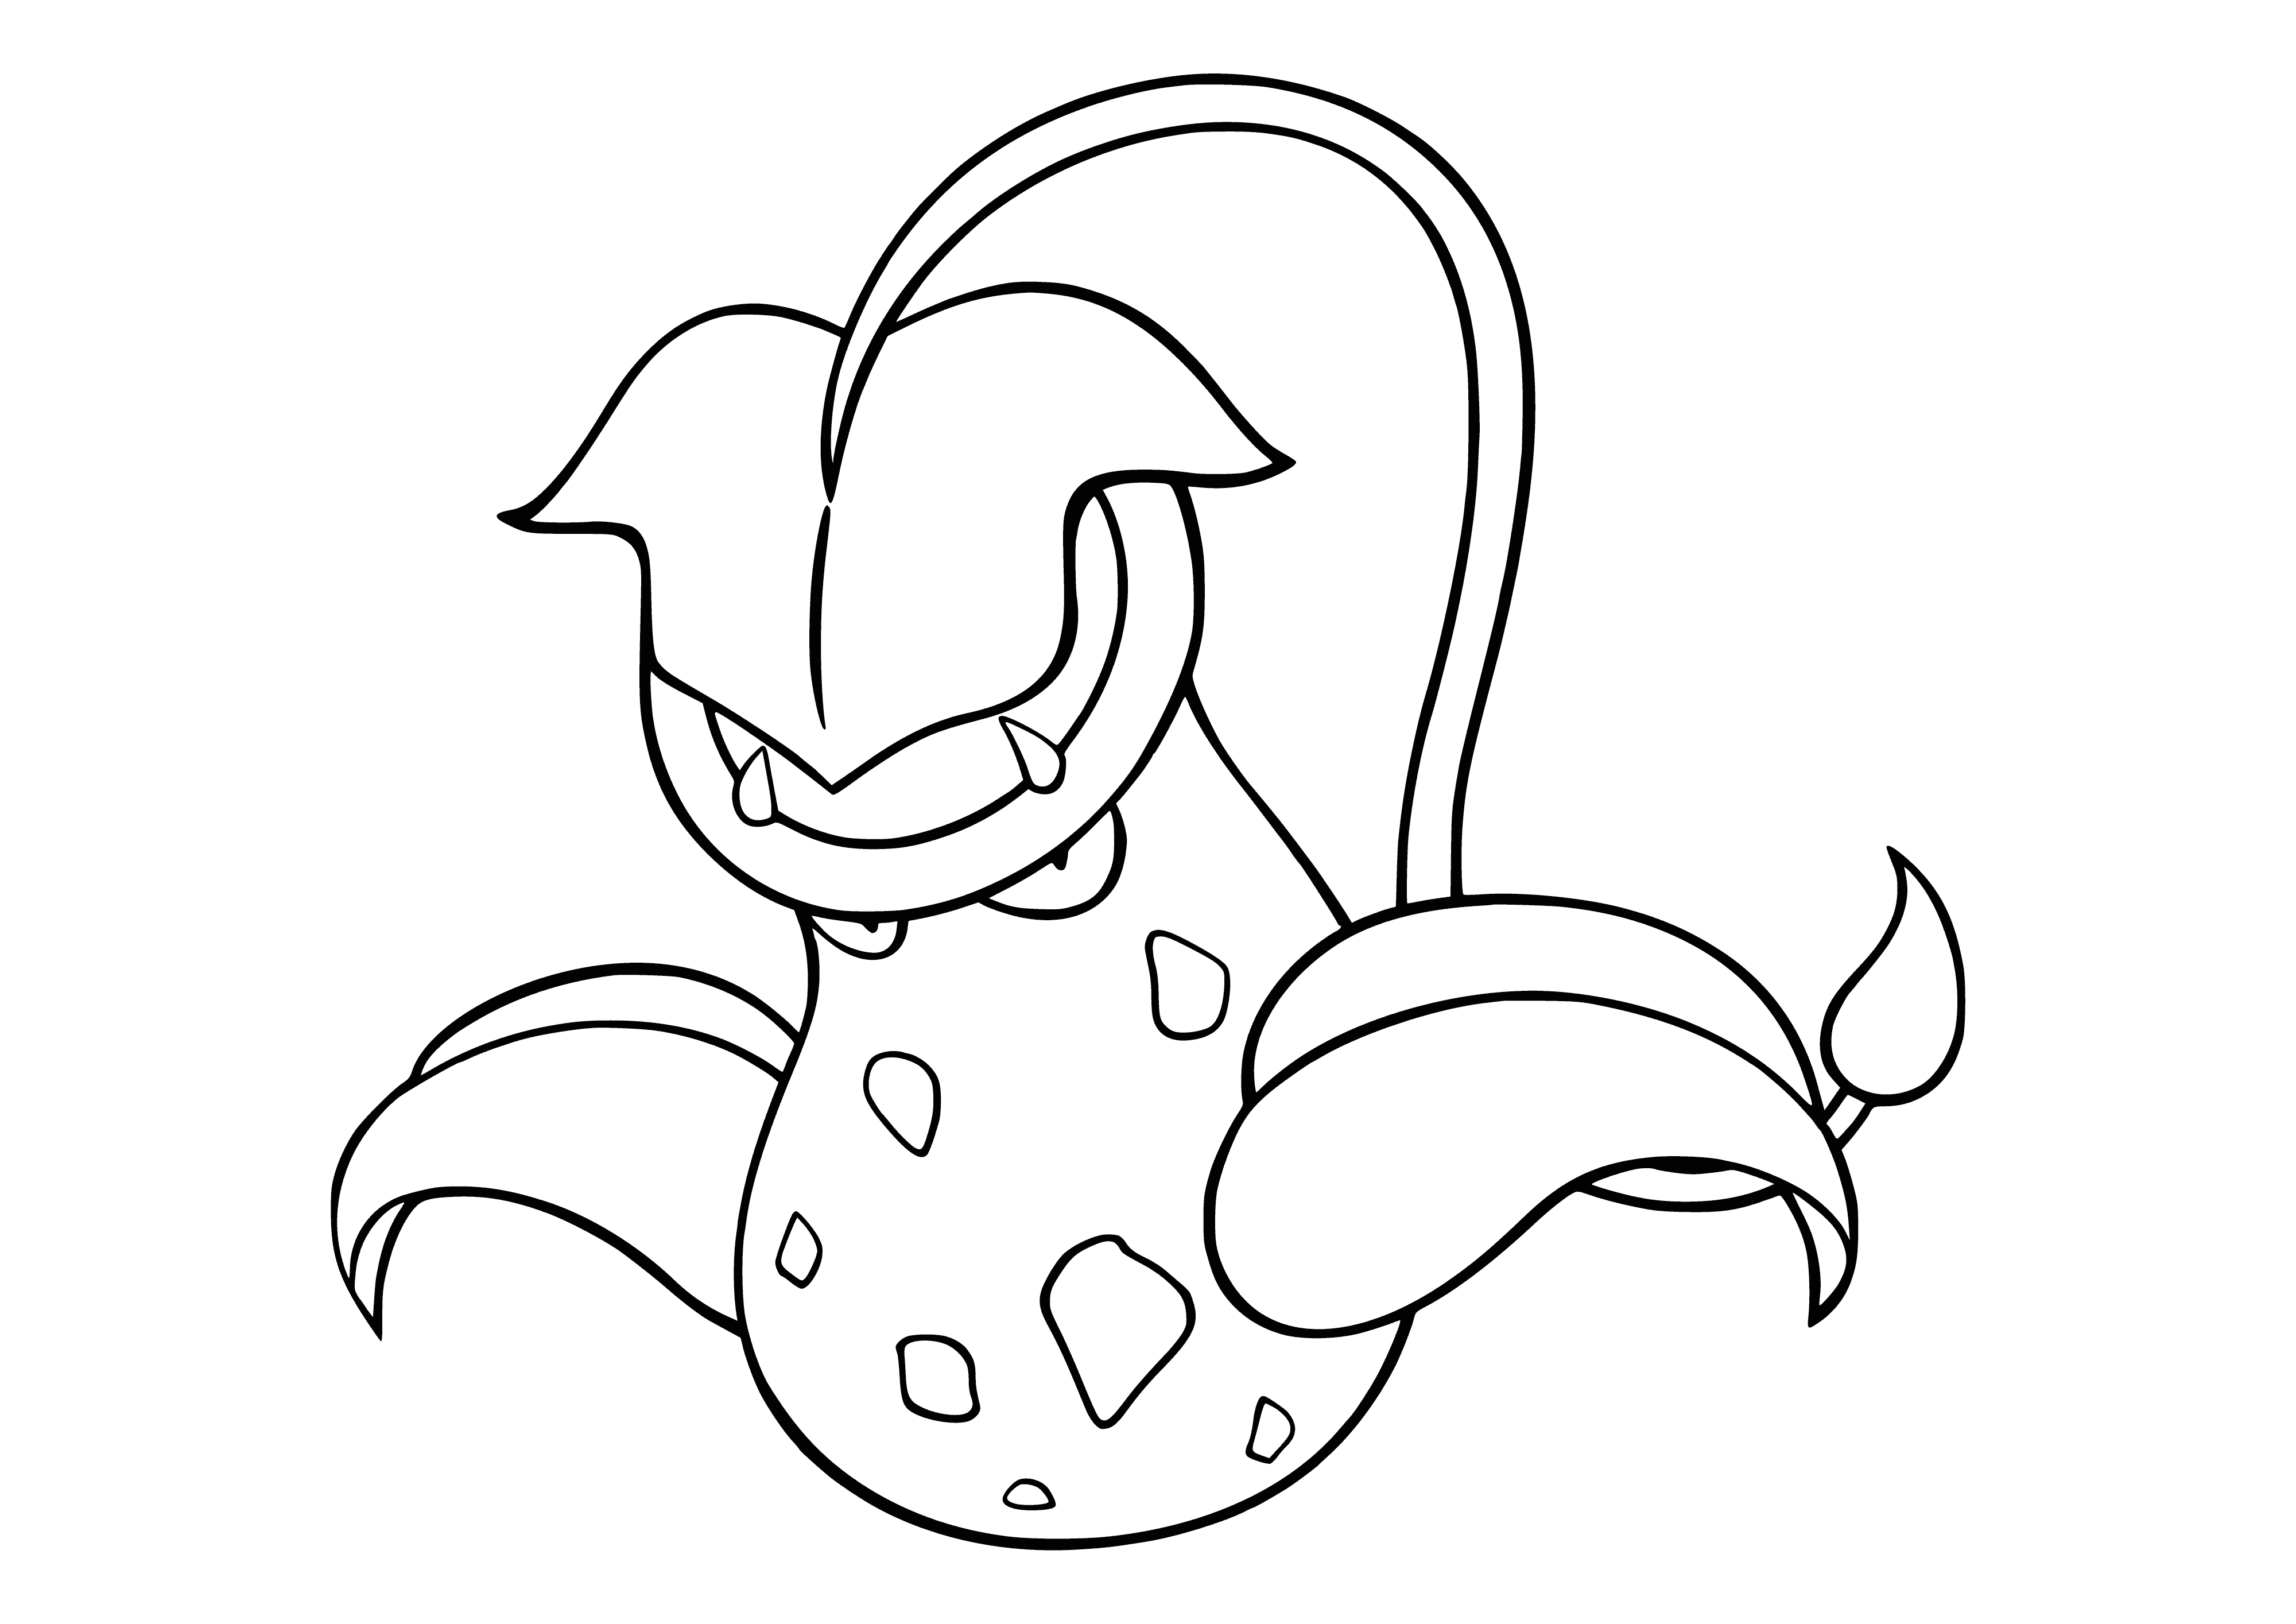 coloring page: unsuspecting prey into its gaping maw.

Victreebel lures prey with its leafy vine, then devours them with its fearsome mouth.